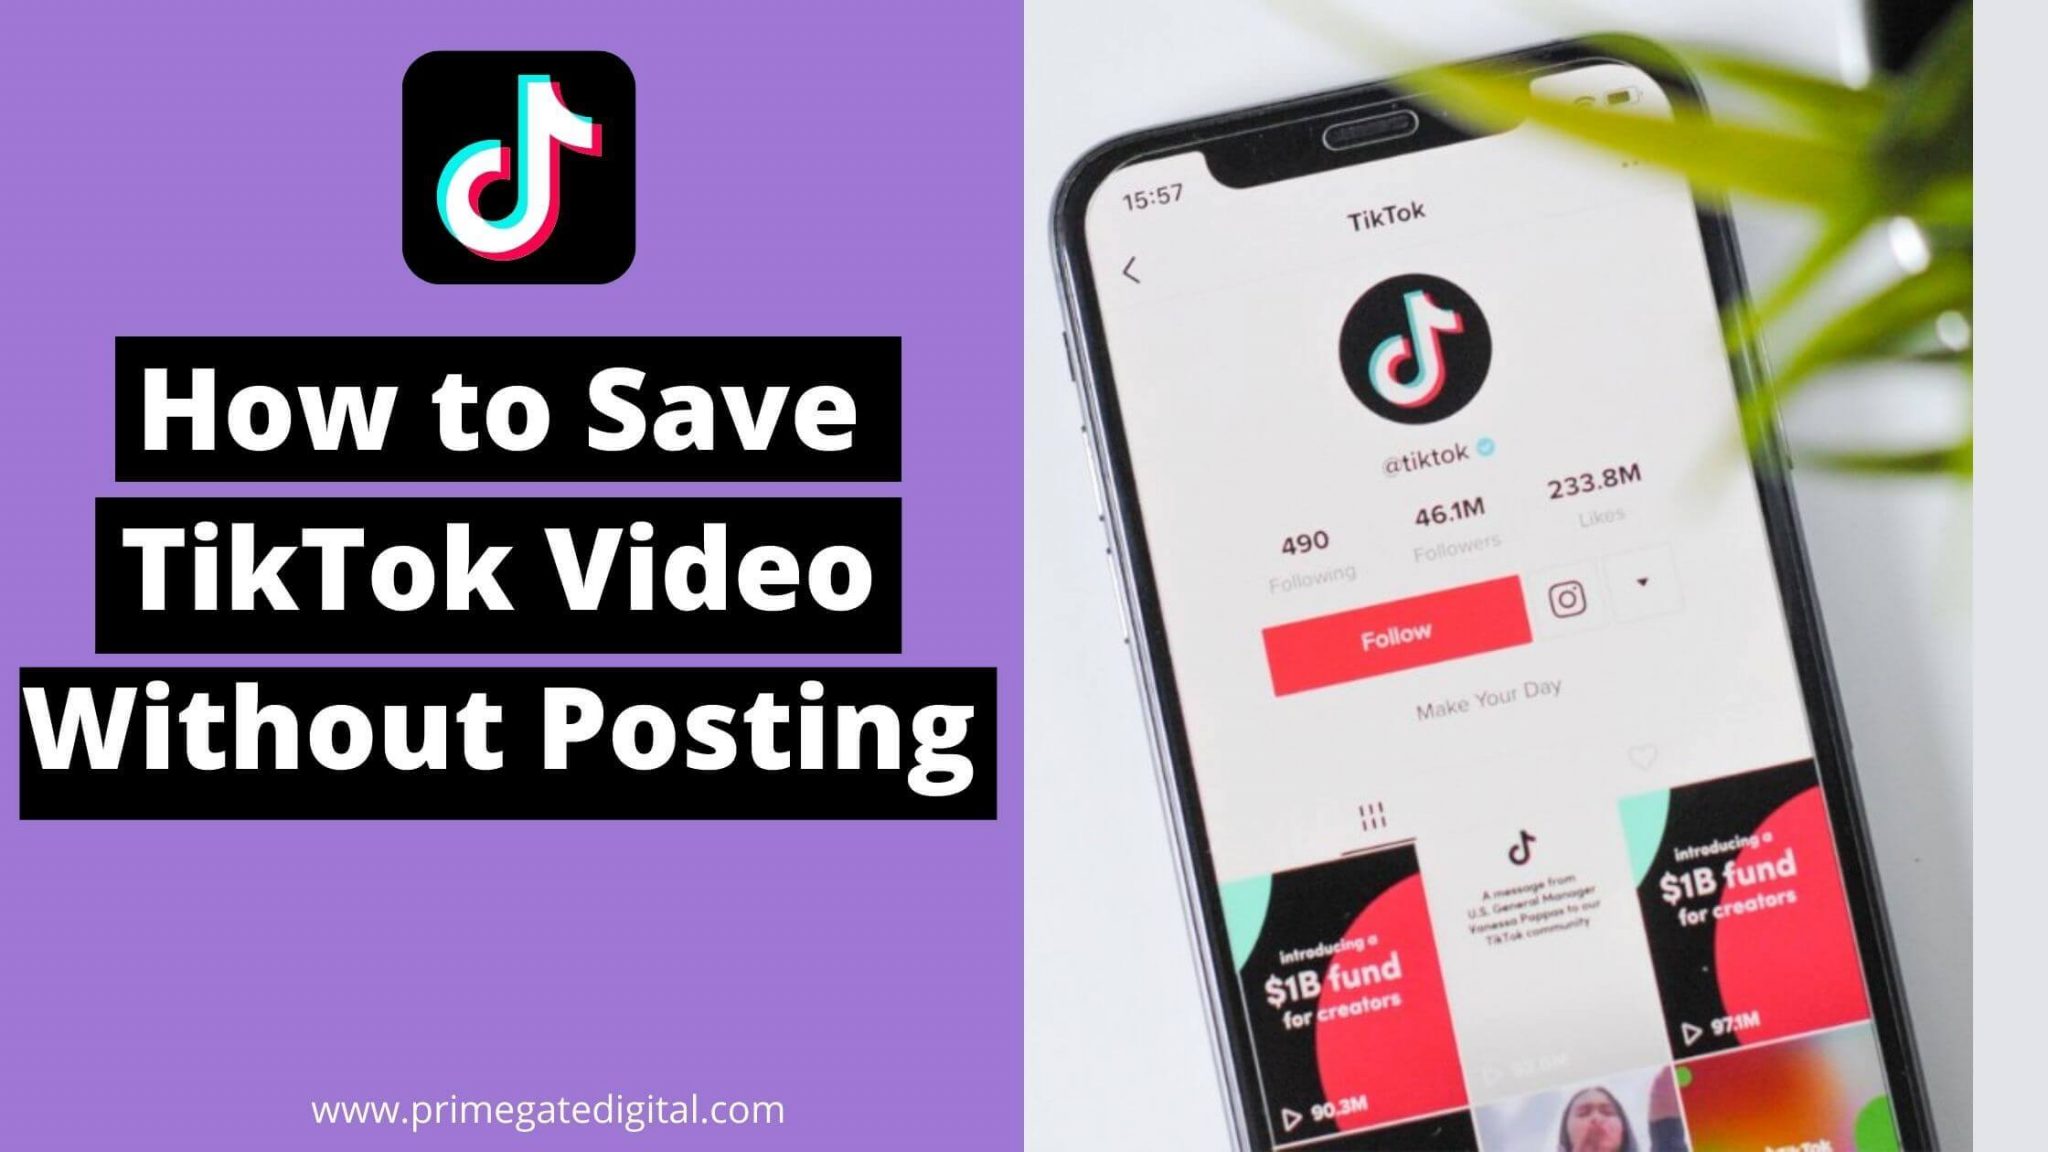 How to Save TikTok Video Without Posting 2022 (REVEALED)